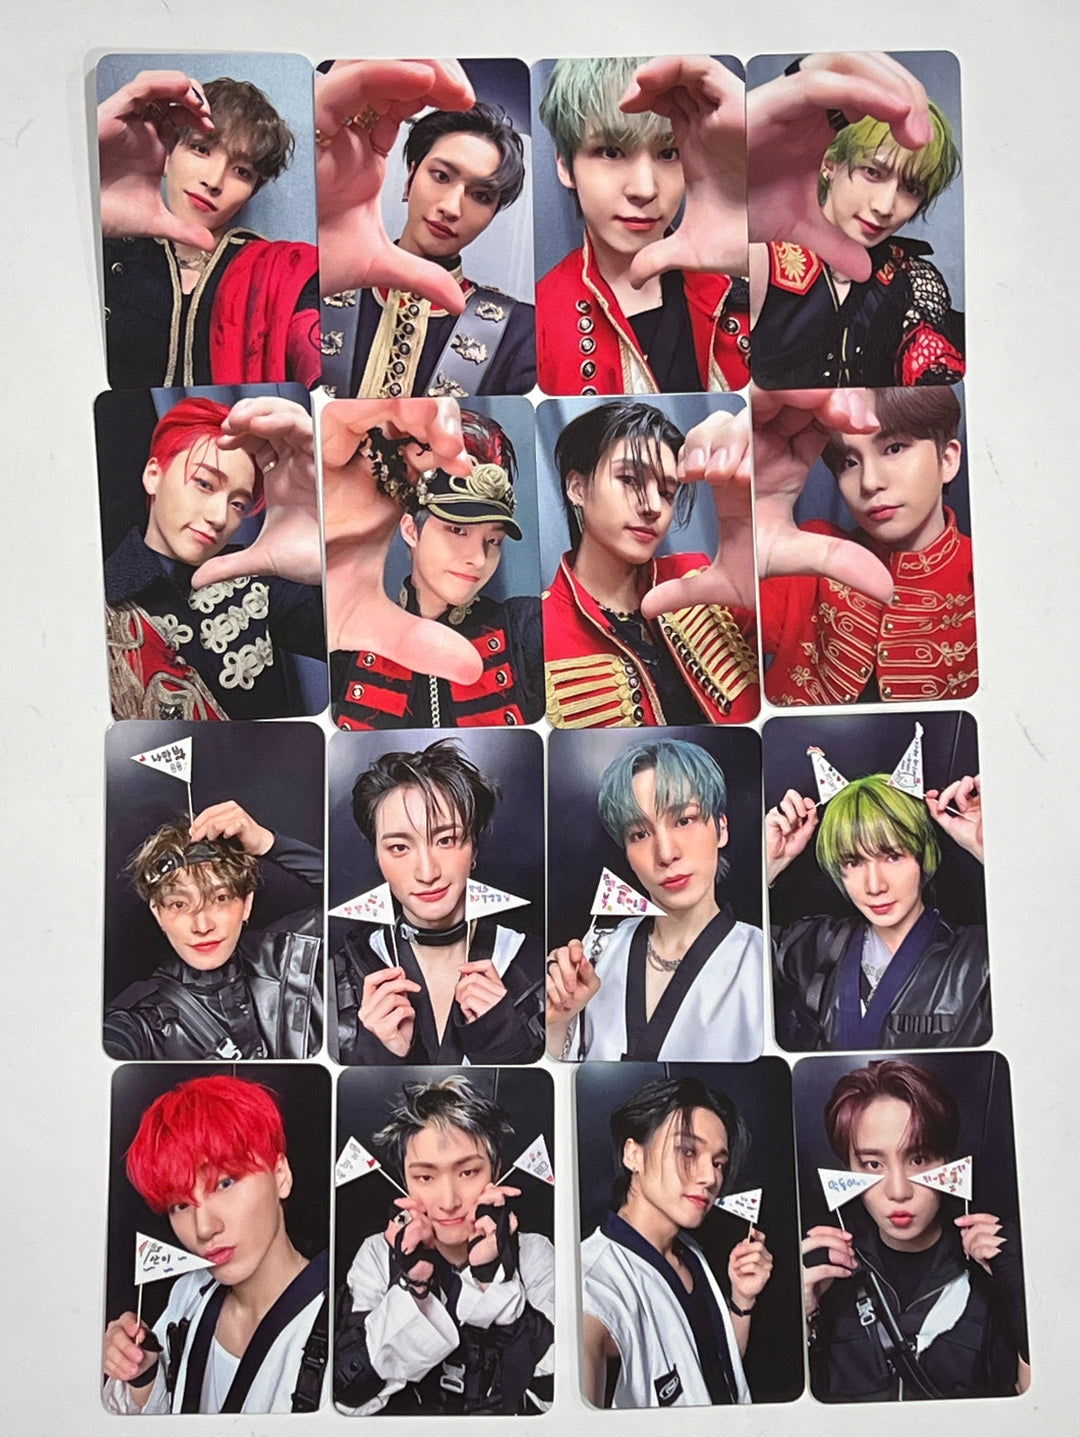 ATEEZ "THE WORLD EP.FIN : WILL" - Yes24 Pre-Order Benefit Photocard [Standard, Digipack] [23.12.06]